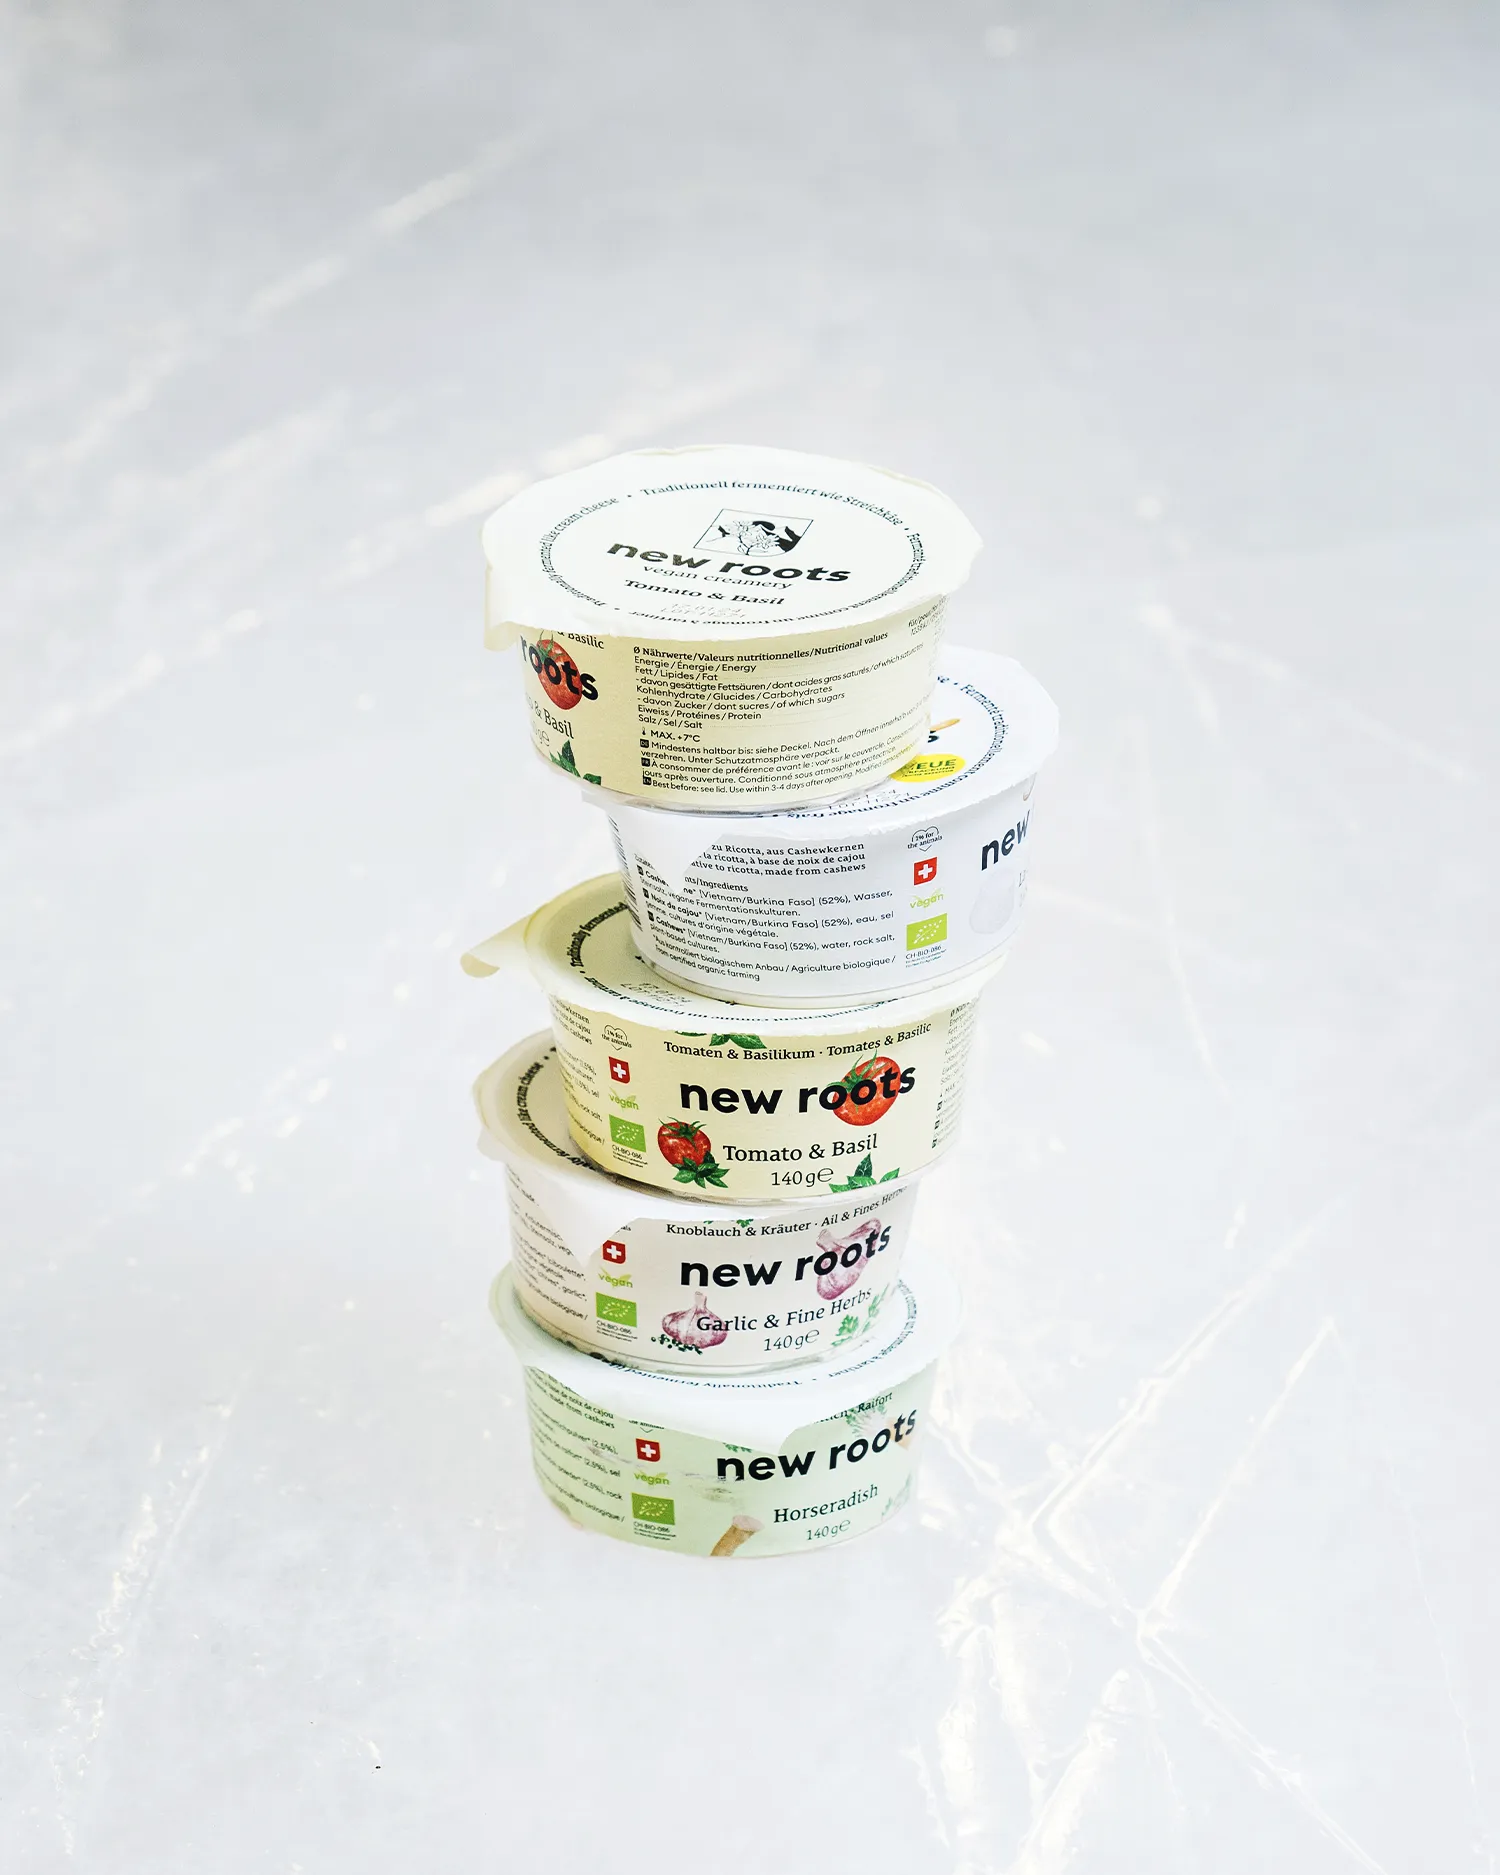 New Roots - Packaging - Spread - Photo Pascale Amez